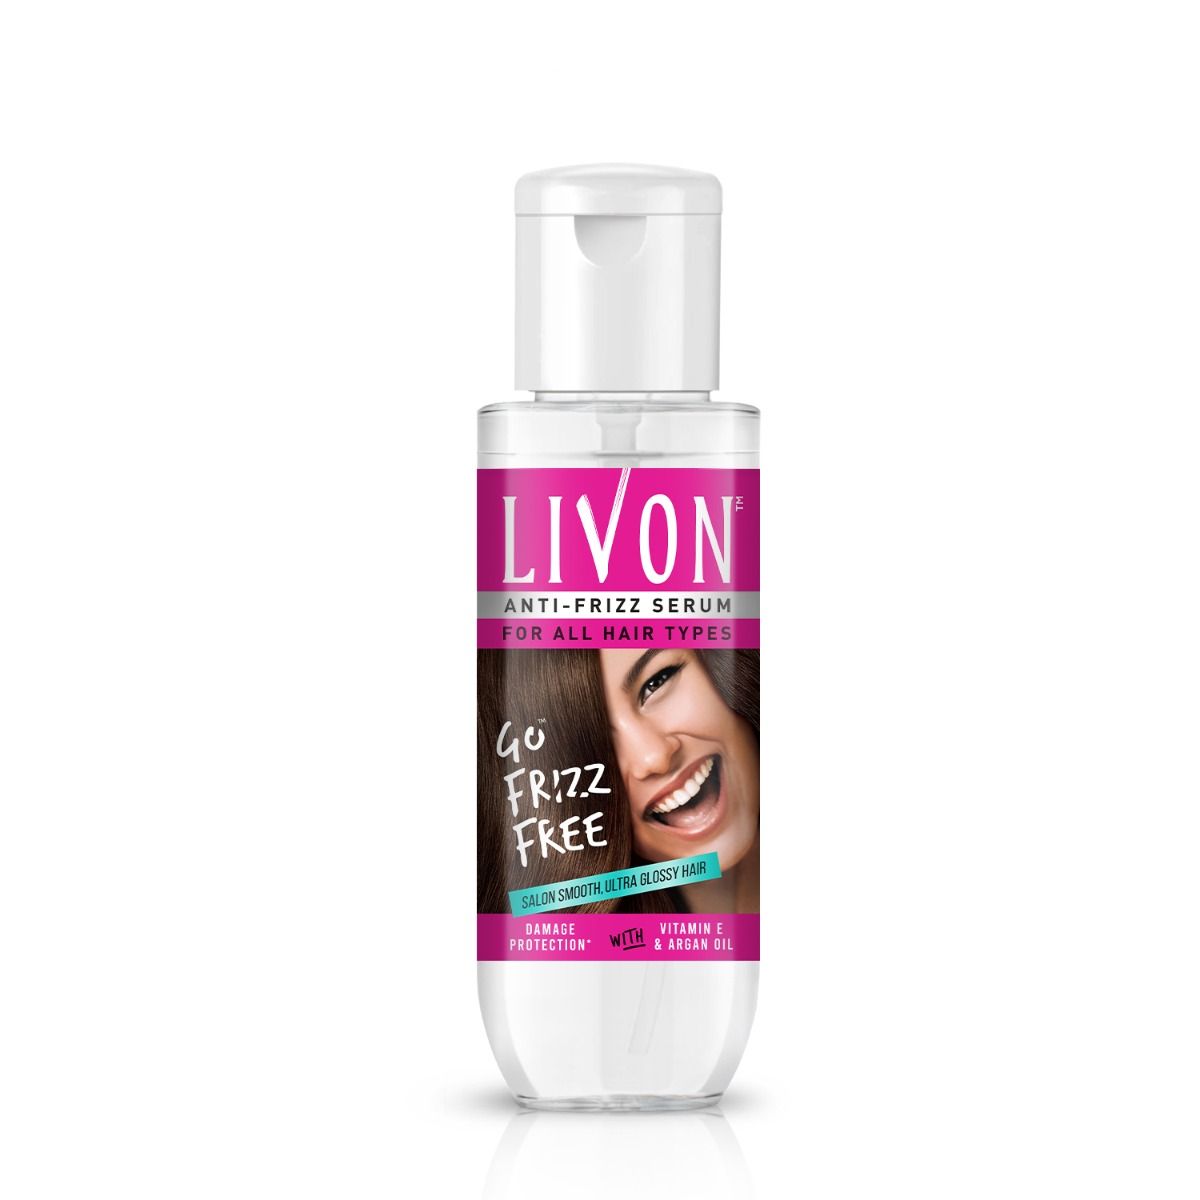 Livon Long Lasting Colour Protect Hair Serum, 59 ml Price, Uses, Side  Effects, Composition - Apollo Pharmacy